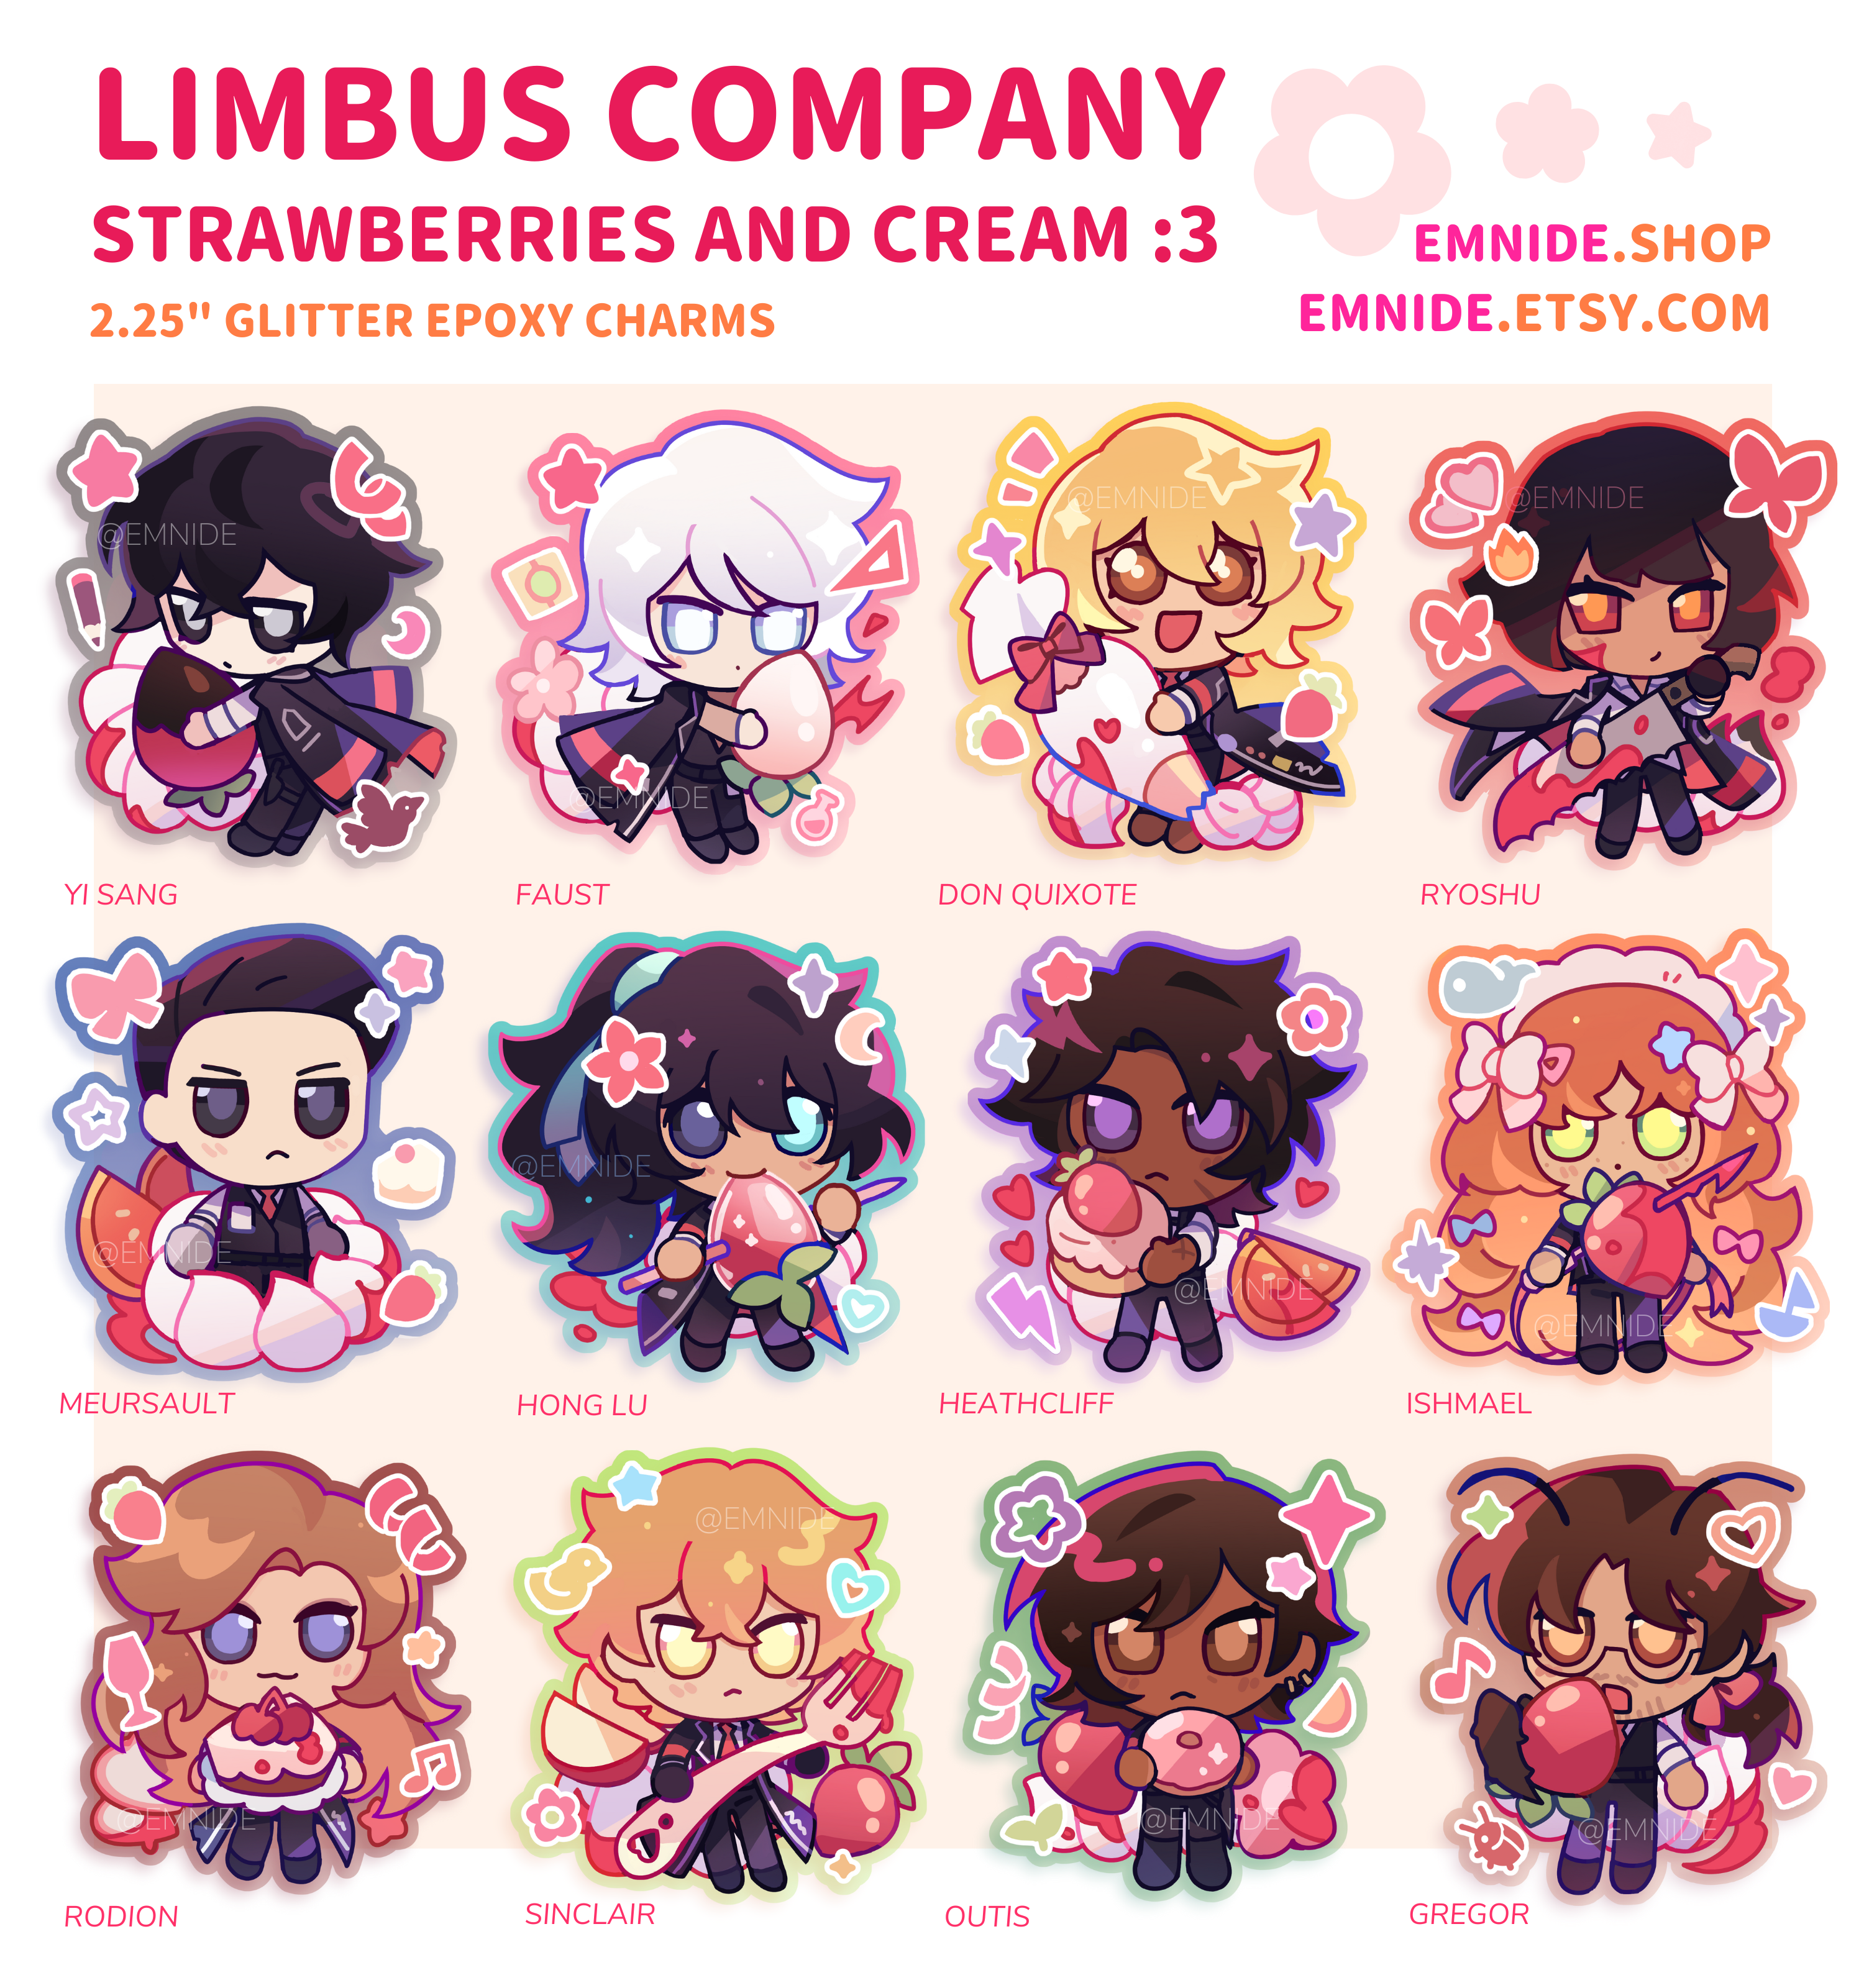 Delectable Dessert Keychains ✧ Limbus Company ⁕ Strawberry and Cream